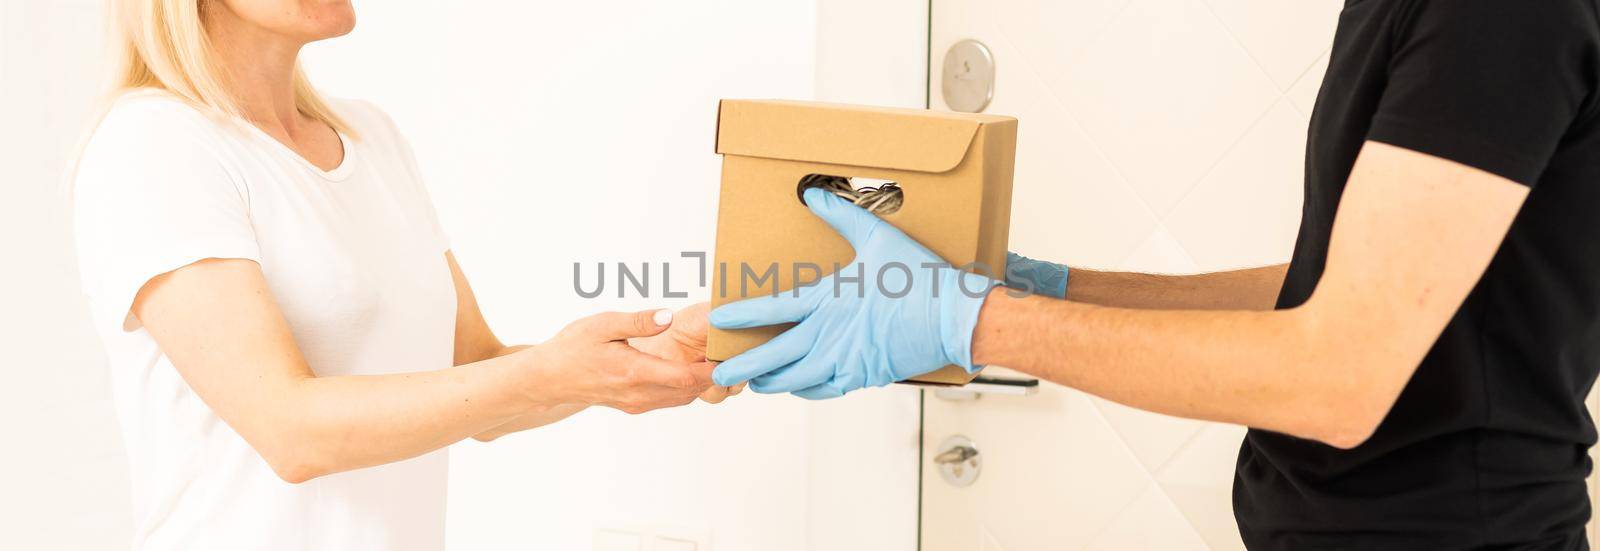 Courier in protective mask and medical gloves delivers takeaway food. Delivery service under quarantine, disease outbreak, coronavirus covid-19 pandemic conditions